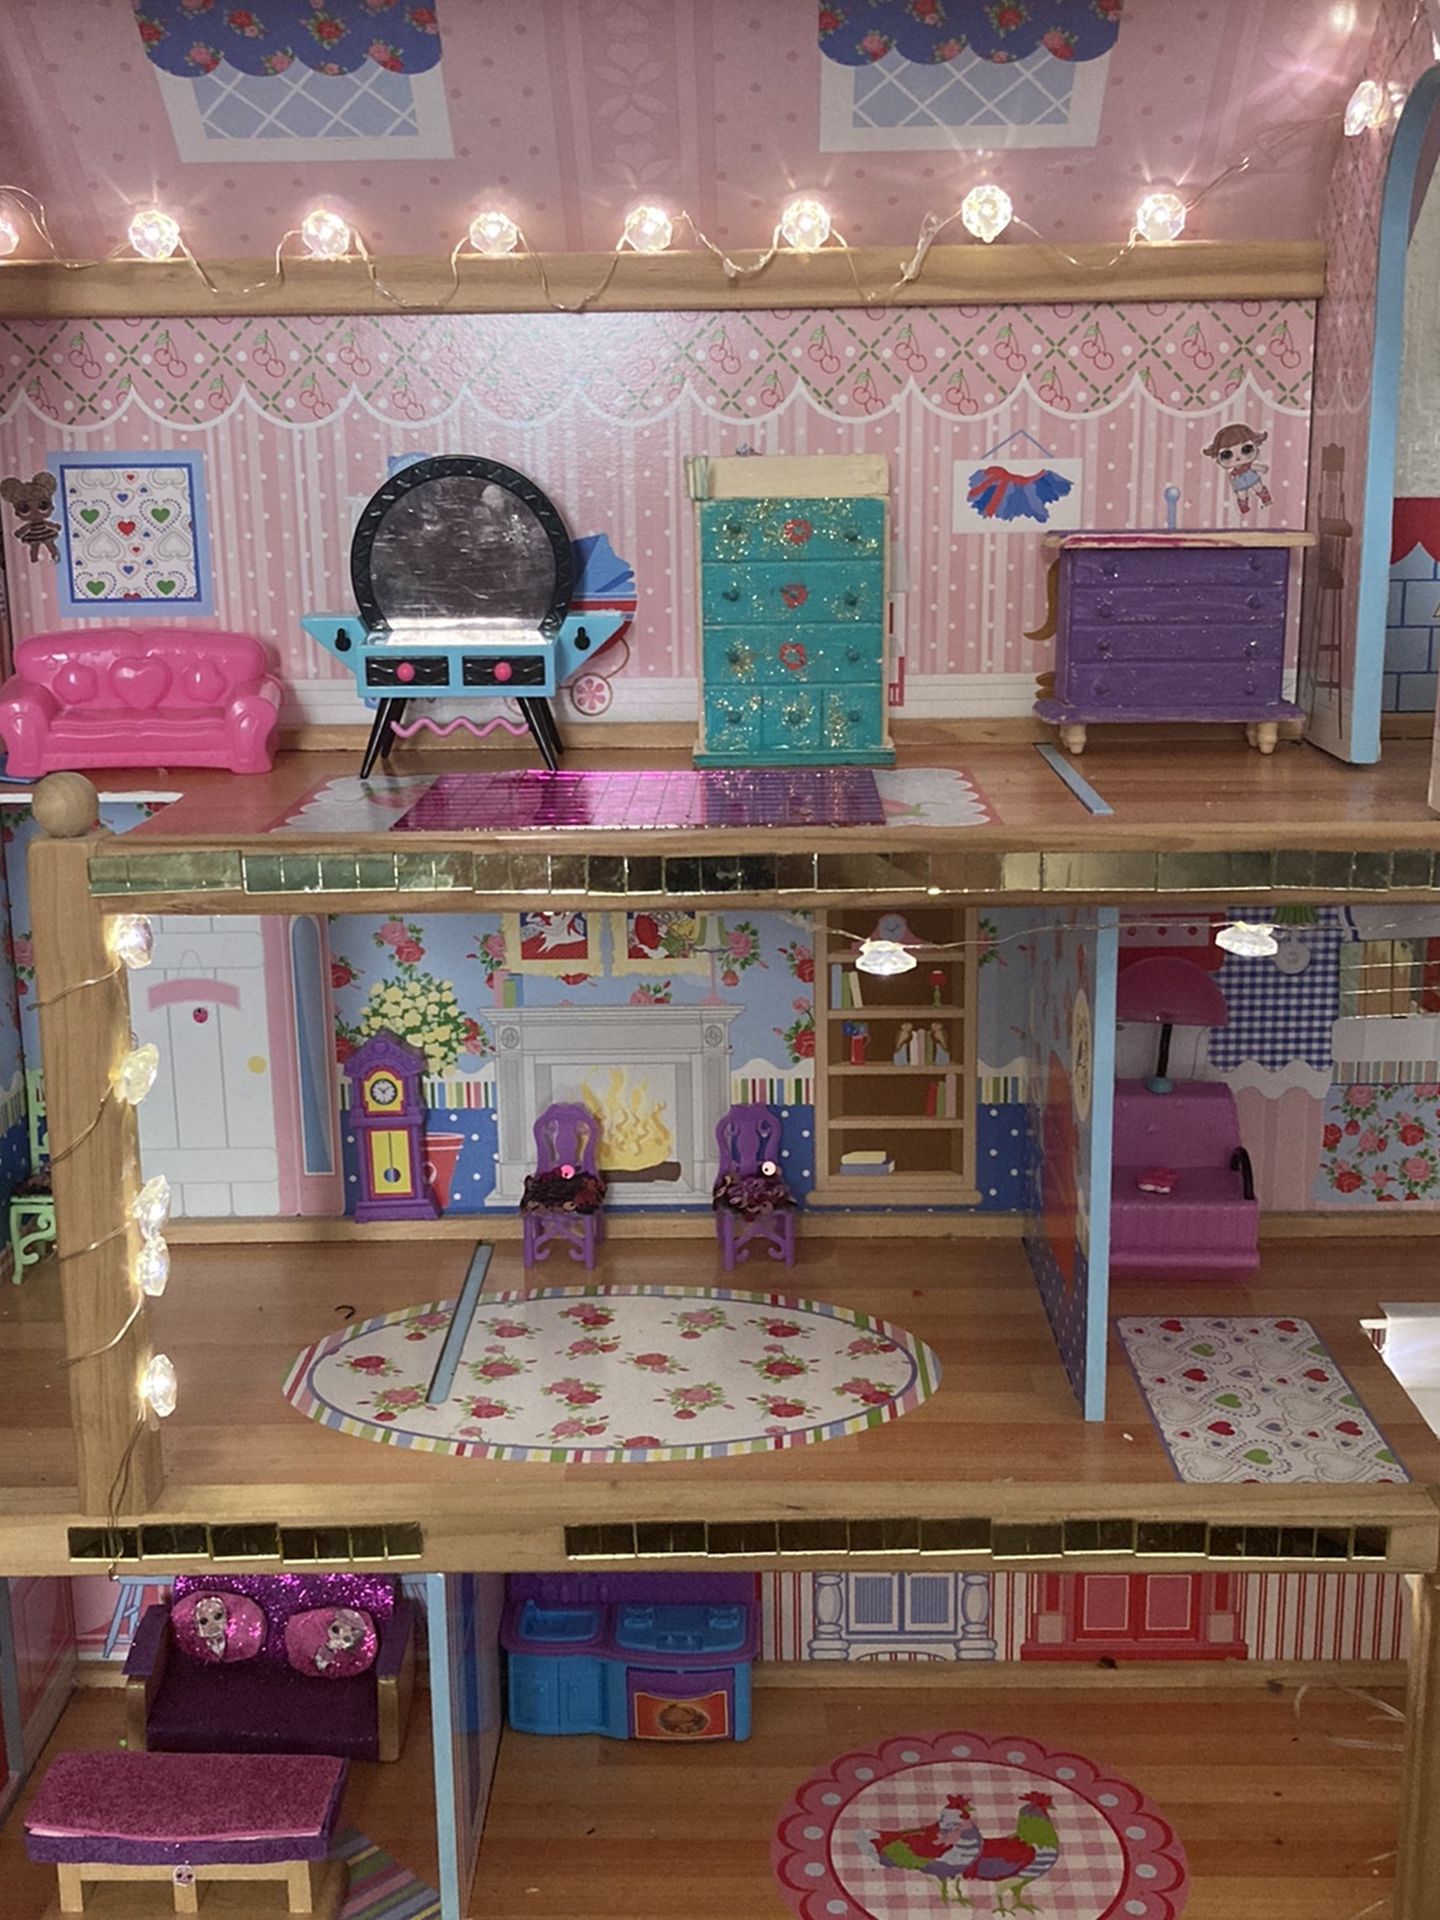 Doll House Not Free Make Offer